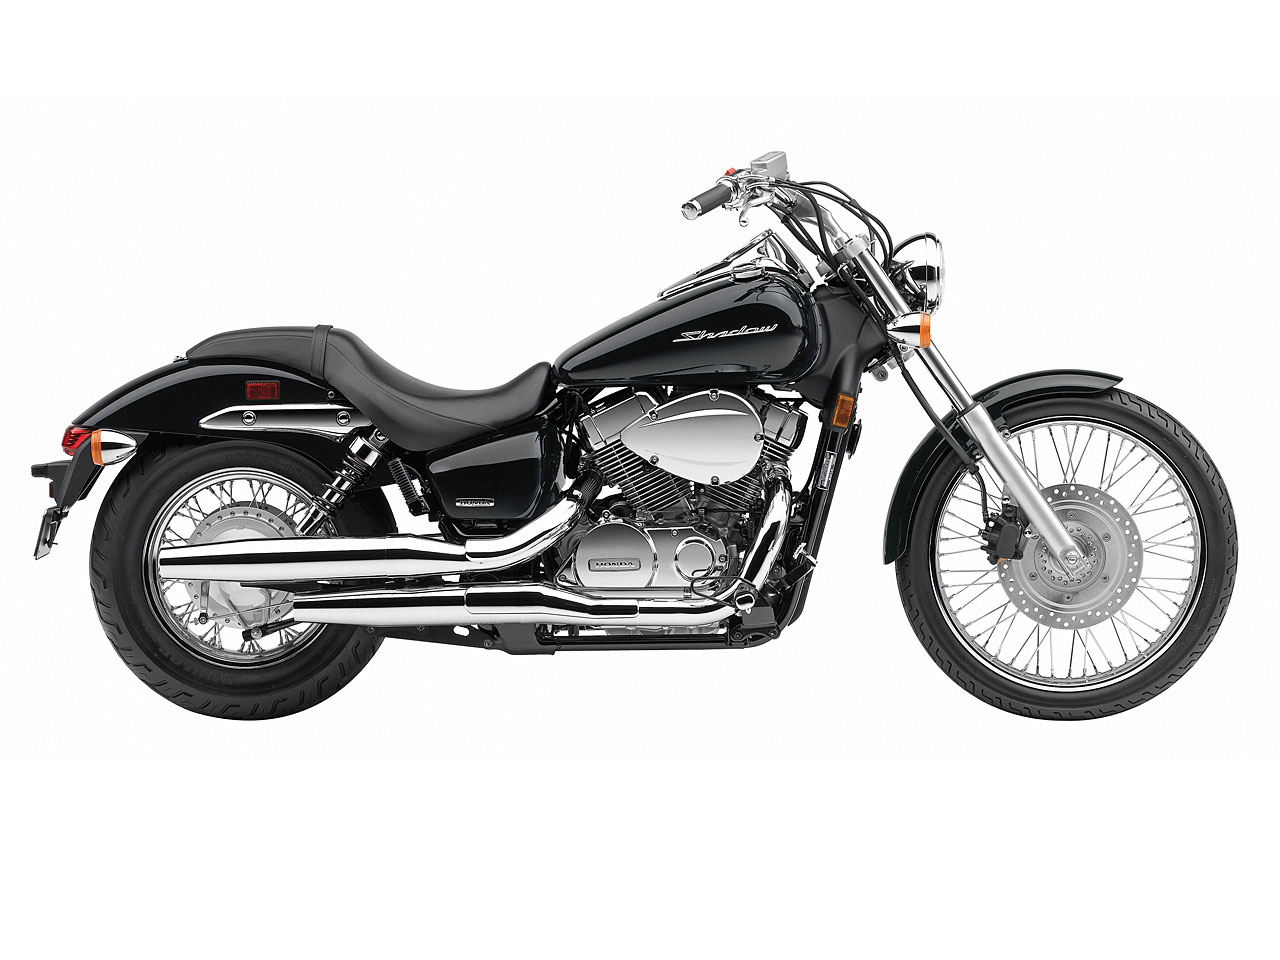 Sell your Honda Cruiser motorcycle Here